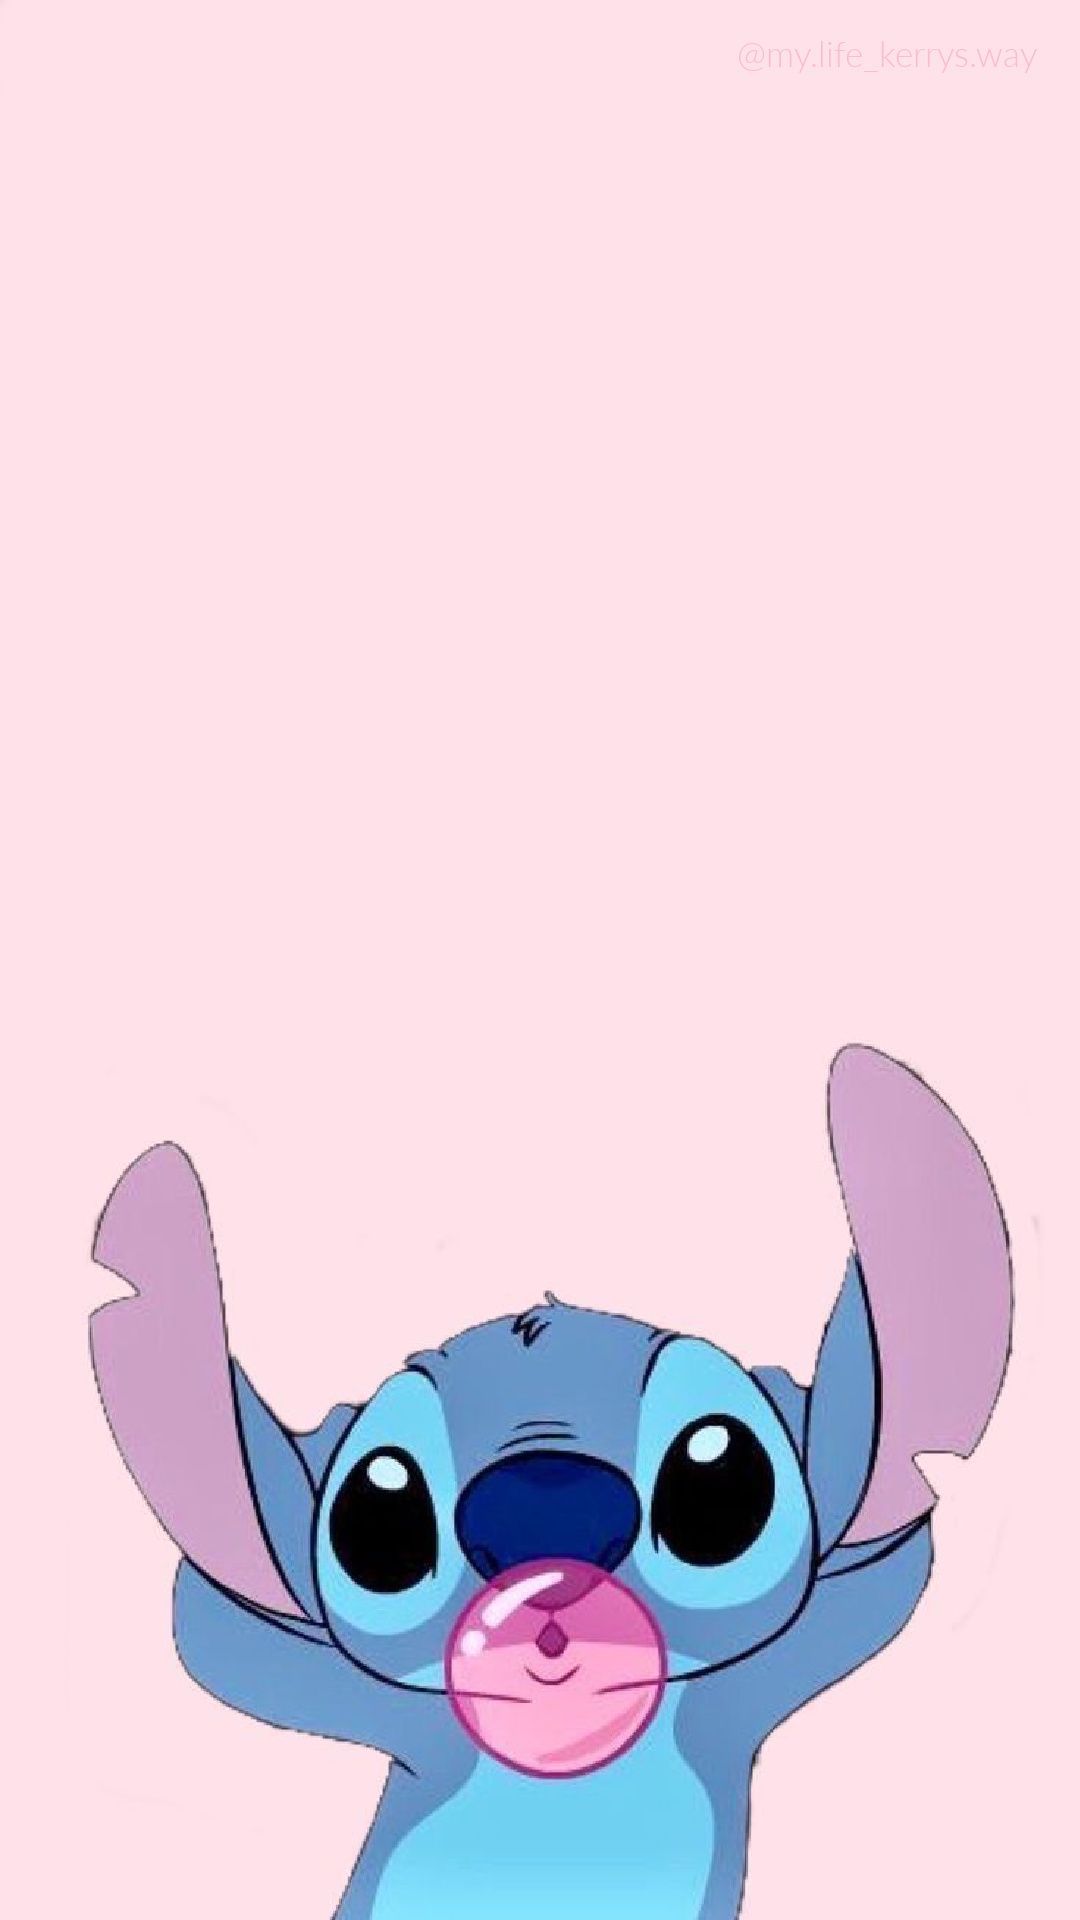 Stitch the little girl with a pink pacifier - Stitch